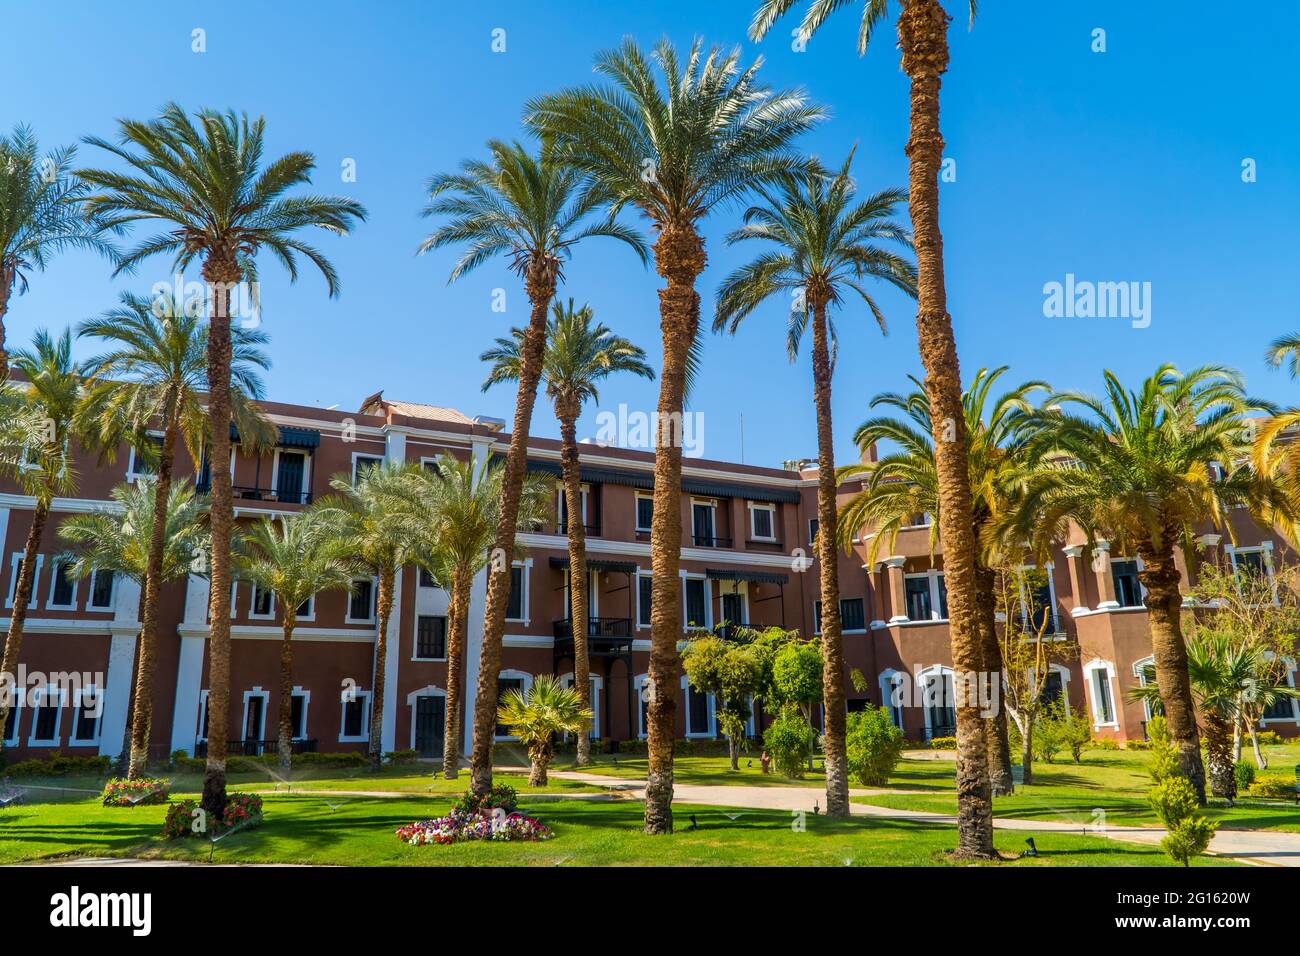 The famous Old Cataract Hotel in Aswan, Egypt Stock Photo